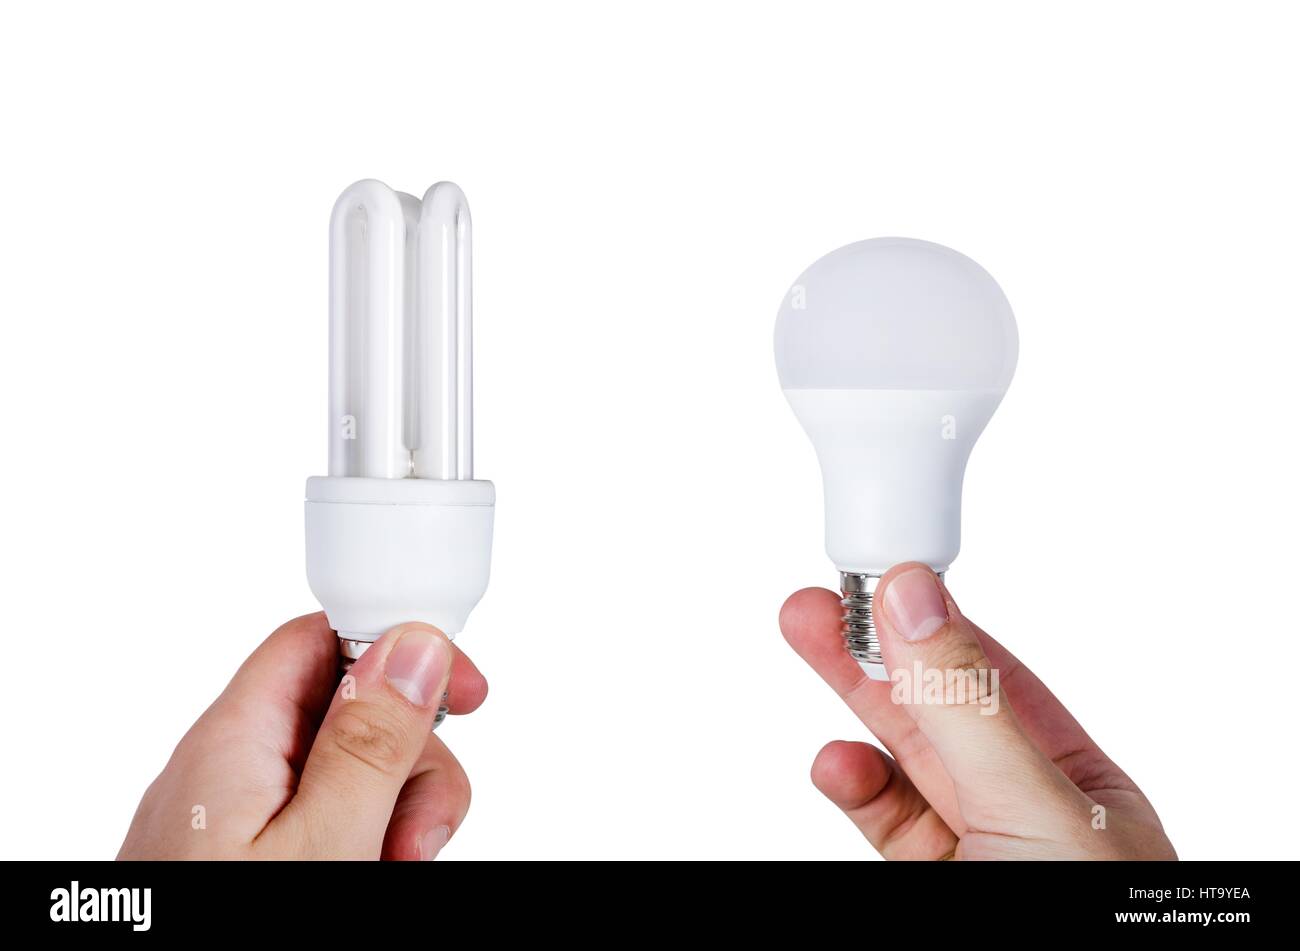 Compare two different types of bulbs. Energy saving lamp or LED choice. Stock Photo